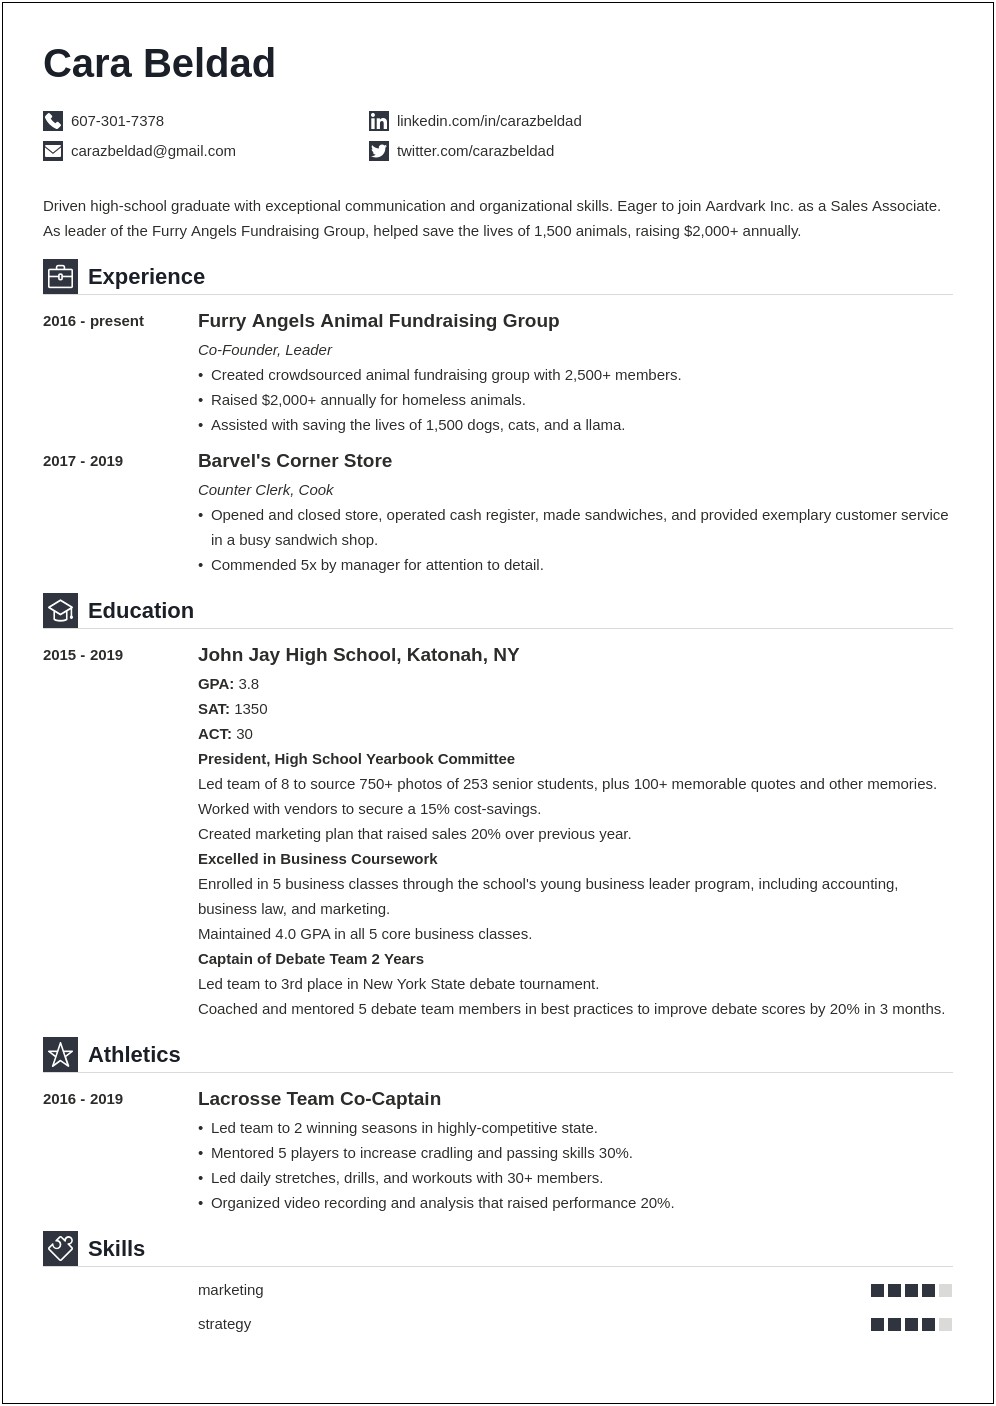 Professional Summary For Resume With No Experience